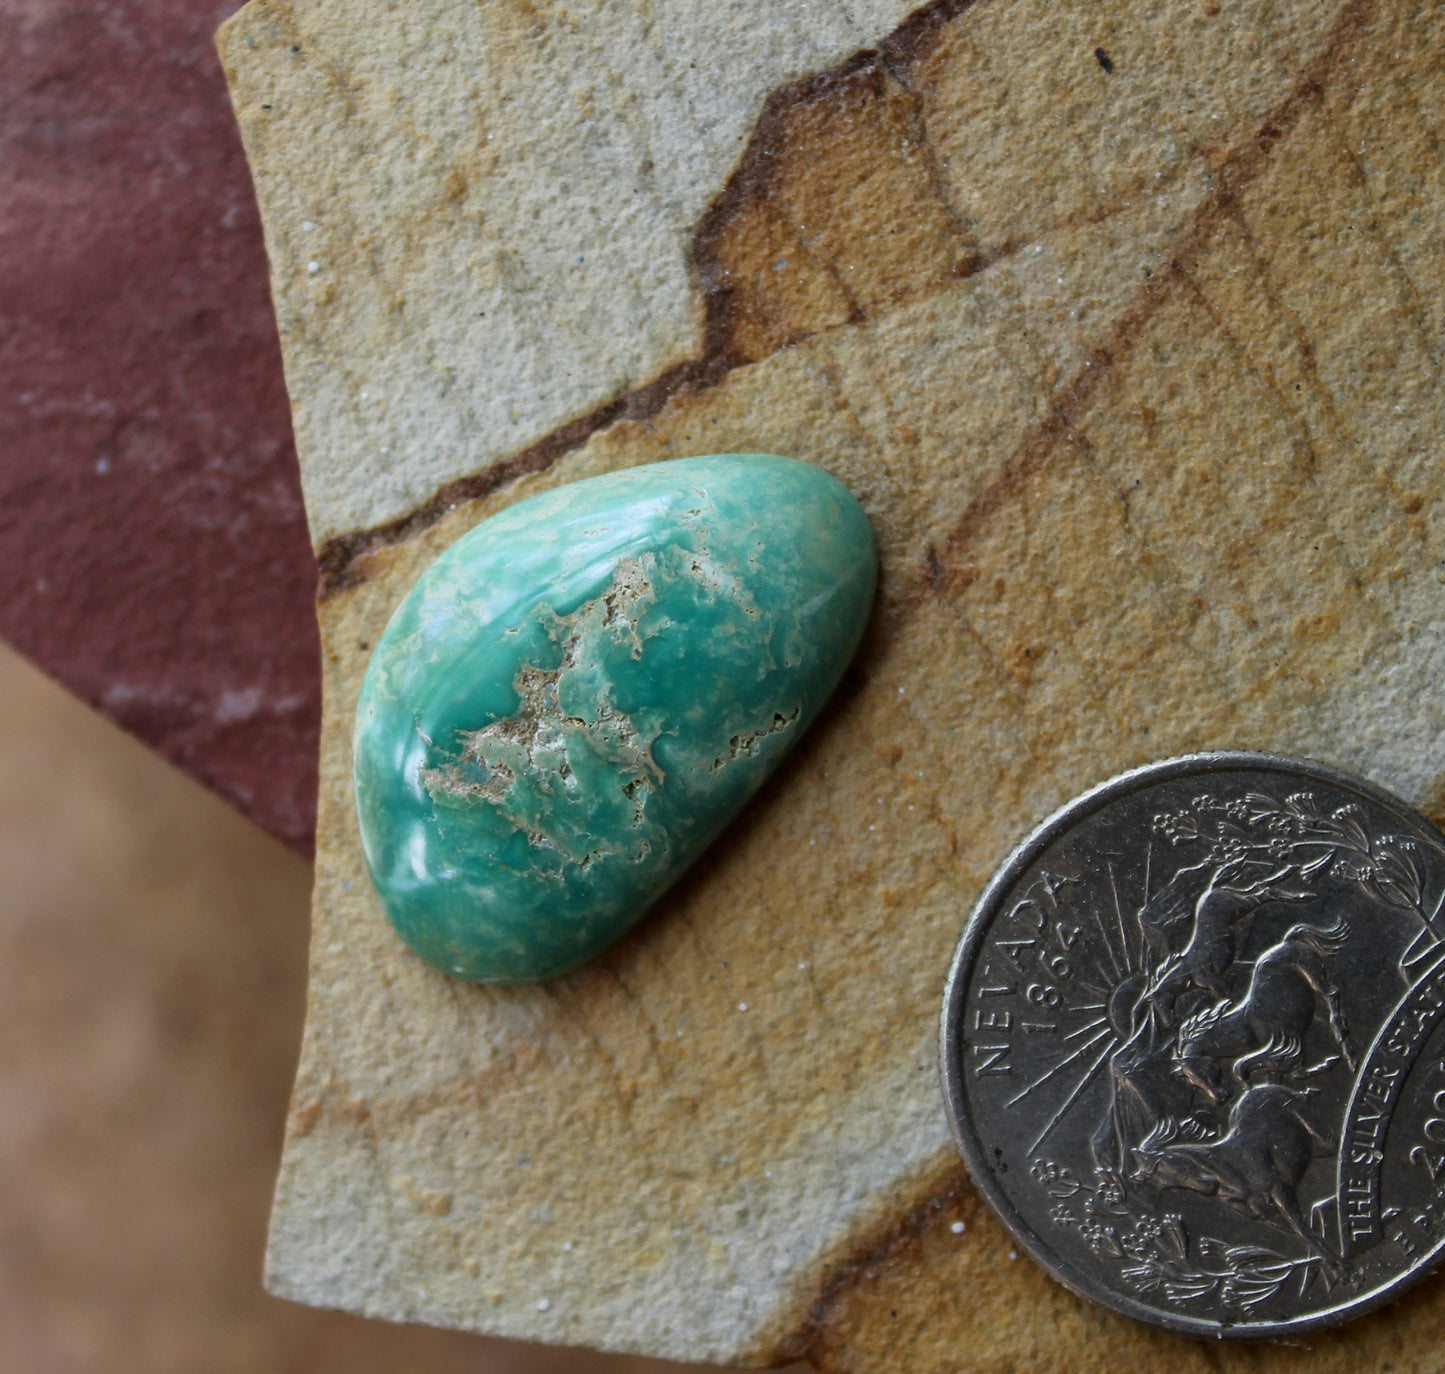 13 carat green Stone Mountain Turquoise cabochon